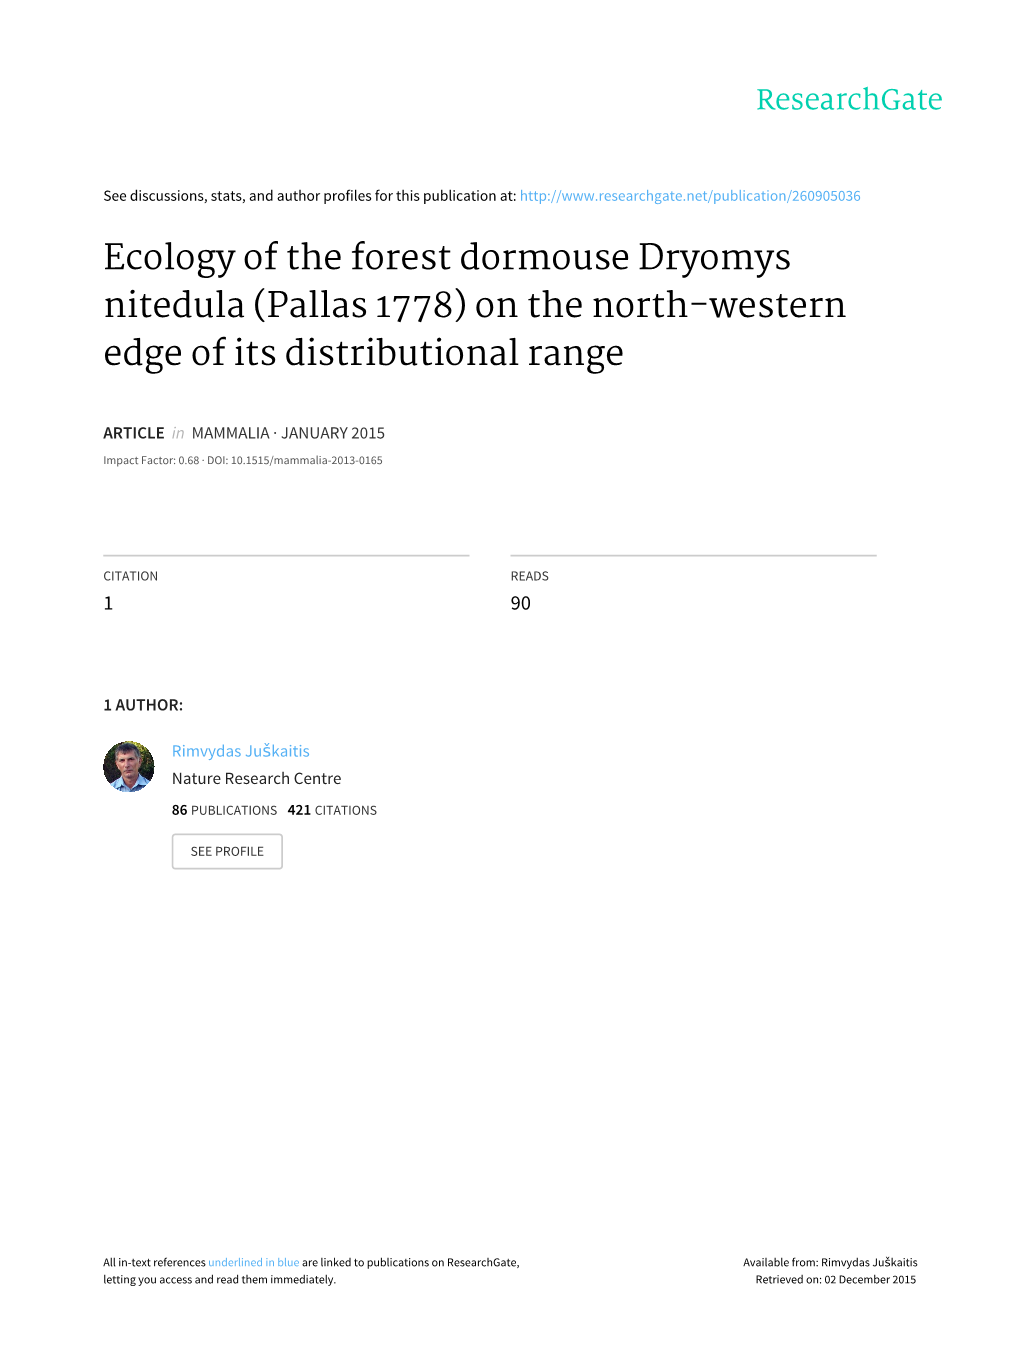 Ecology of the Forest Dormouse Dryomys Nitedula (Pallas 1778) on the North-Western Edge of Its Distributional Range